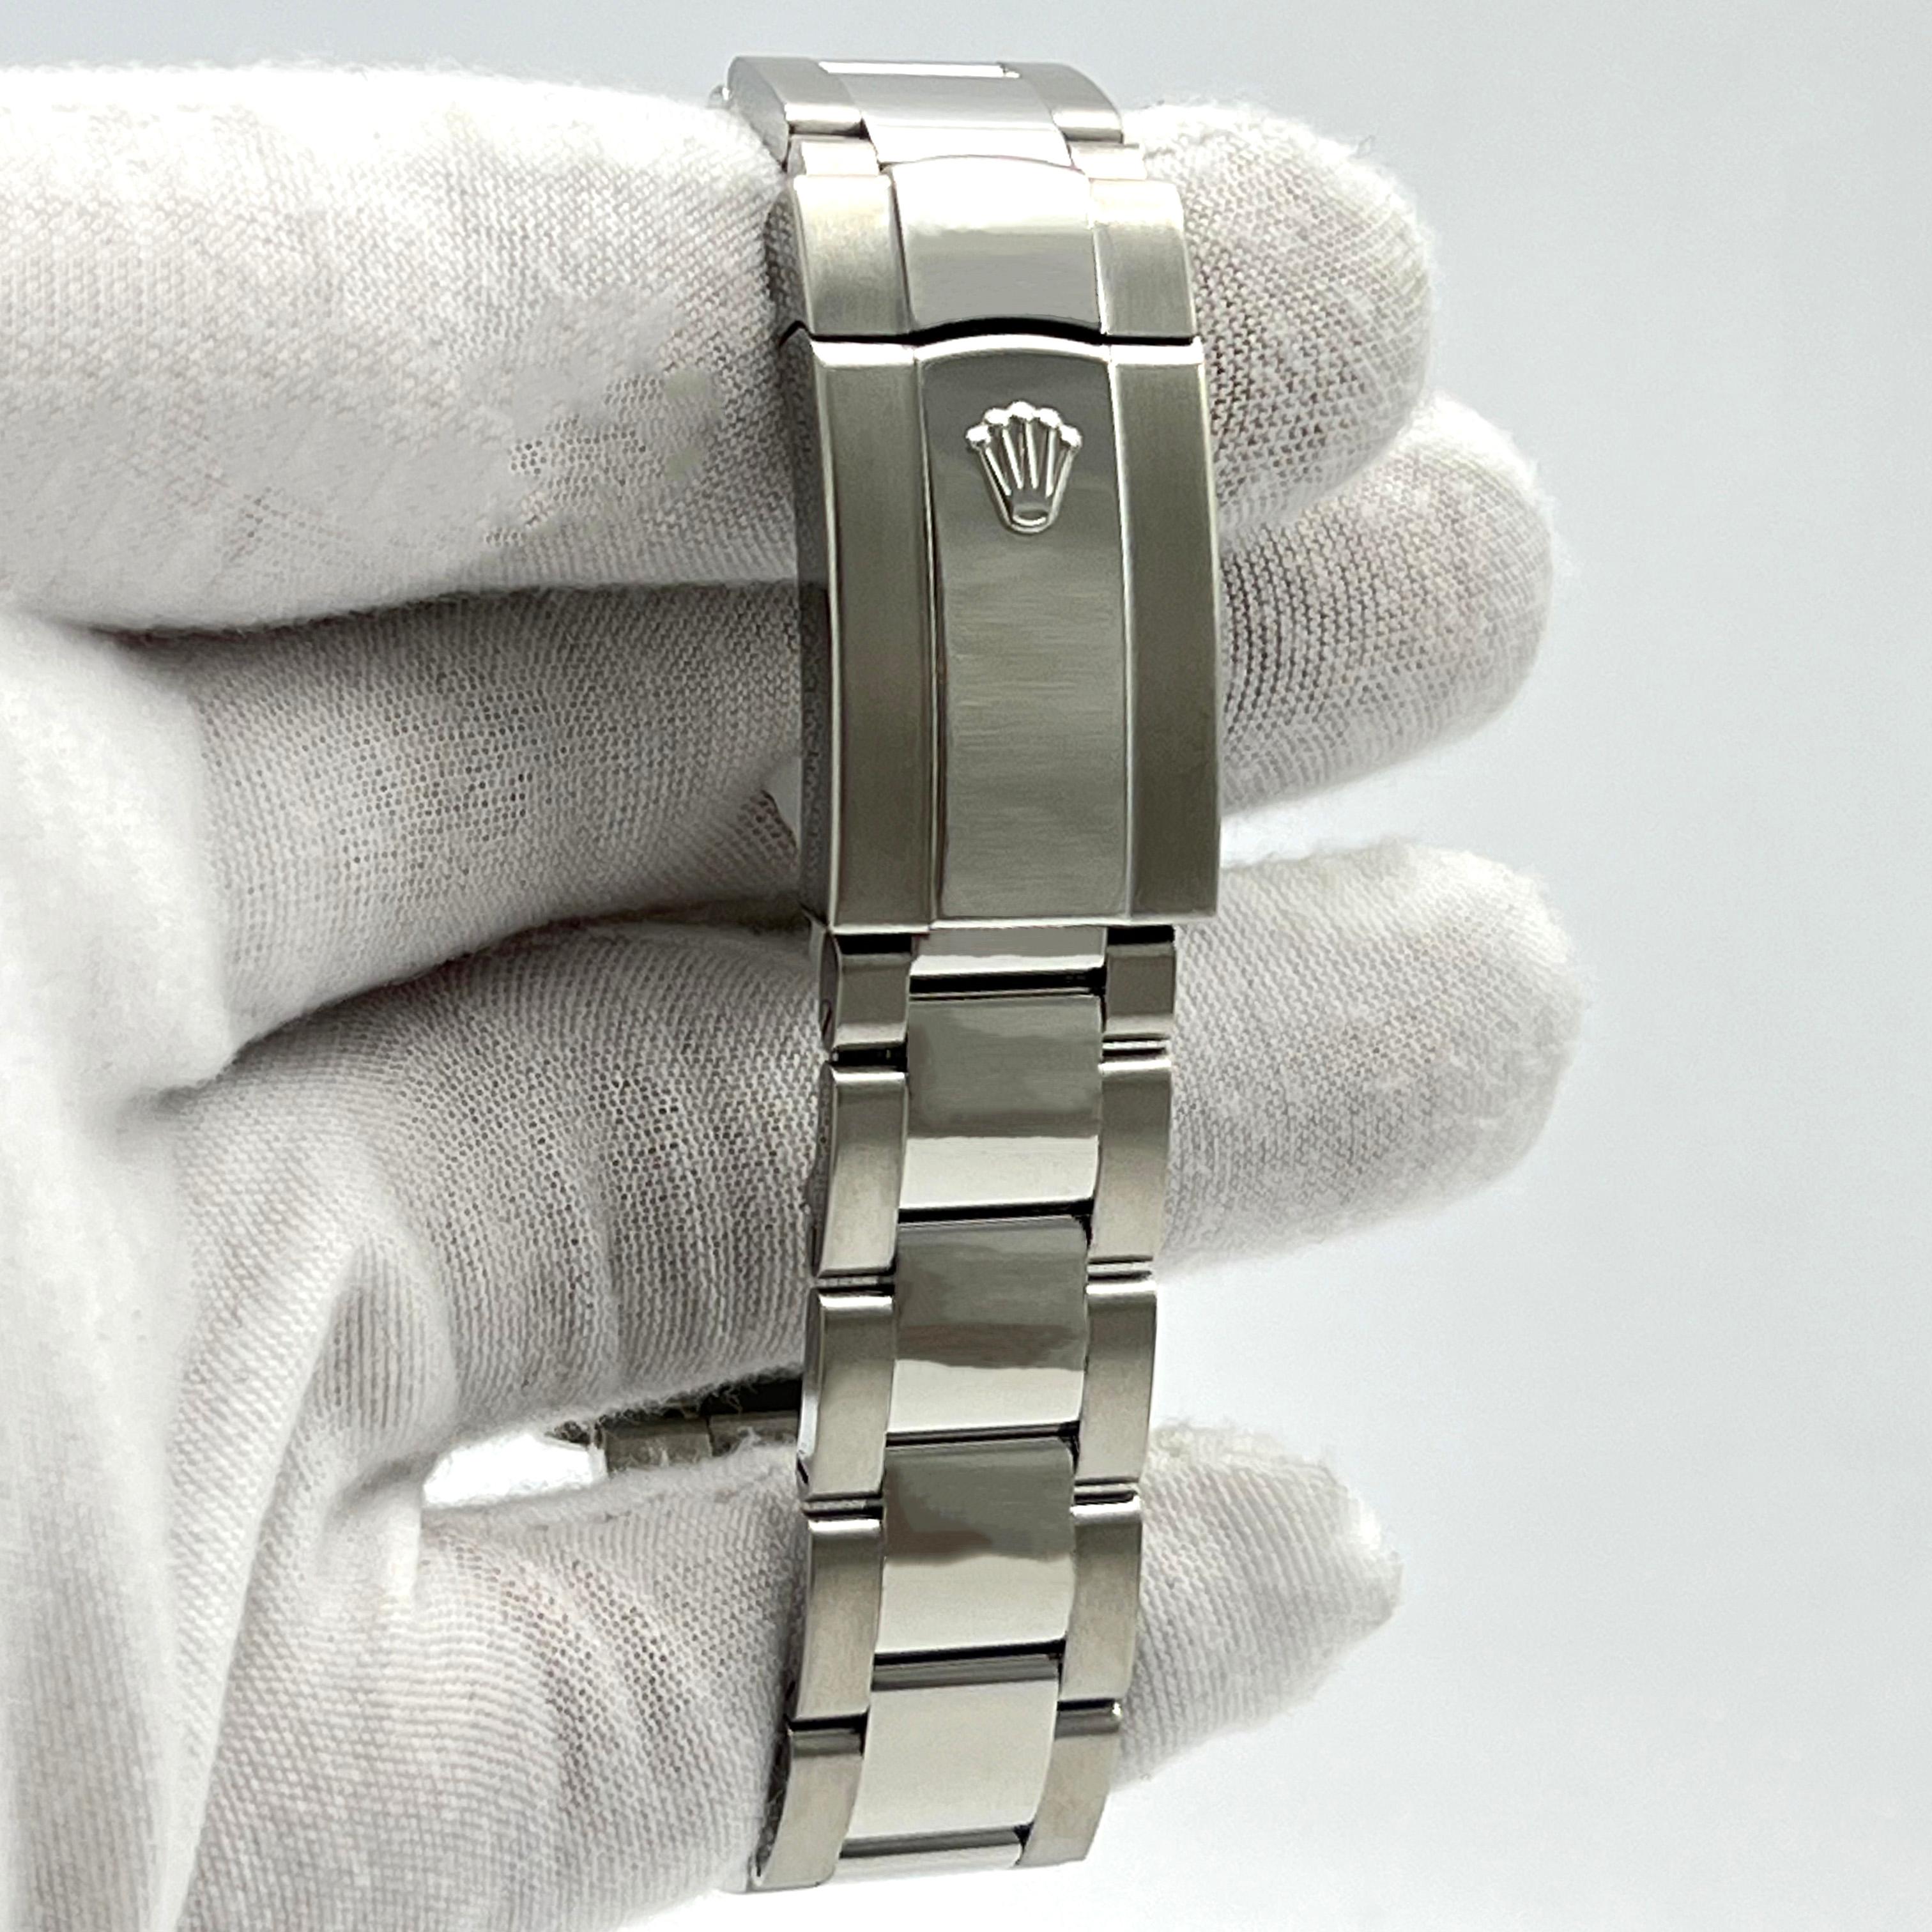 Rolex Datejust 36mm, Ref. 116244 In Excellent Condition For Sale In New York, NY